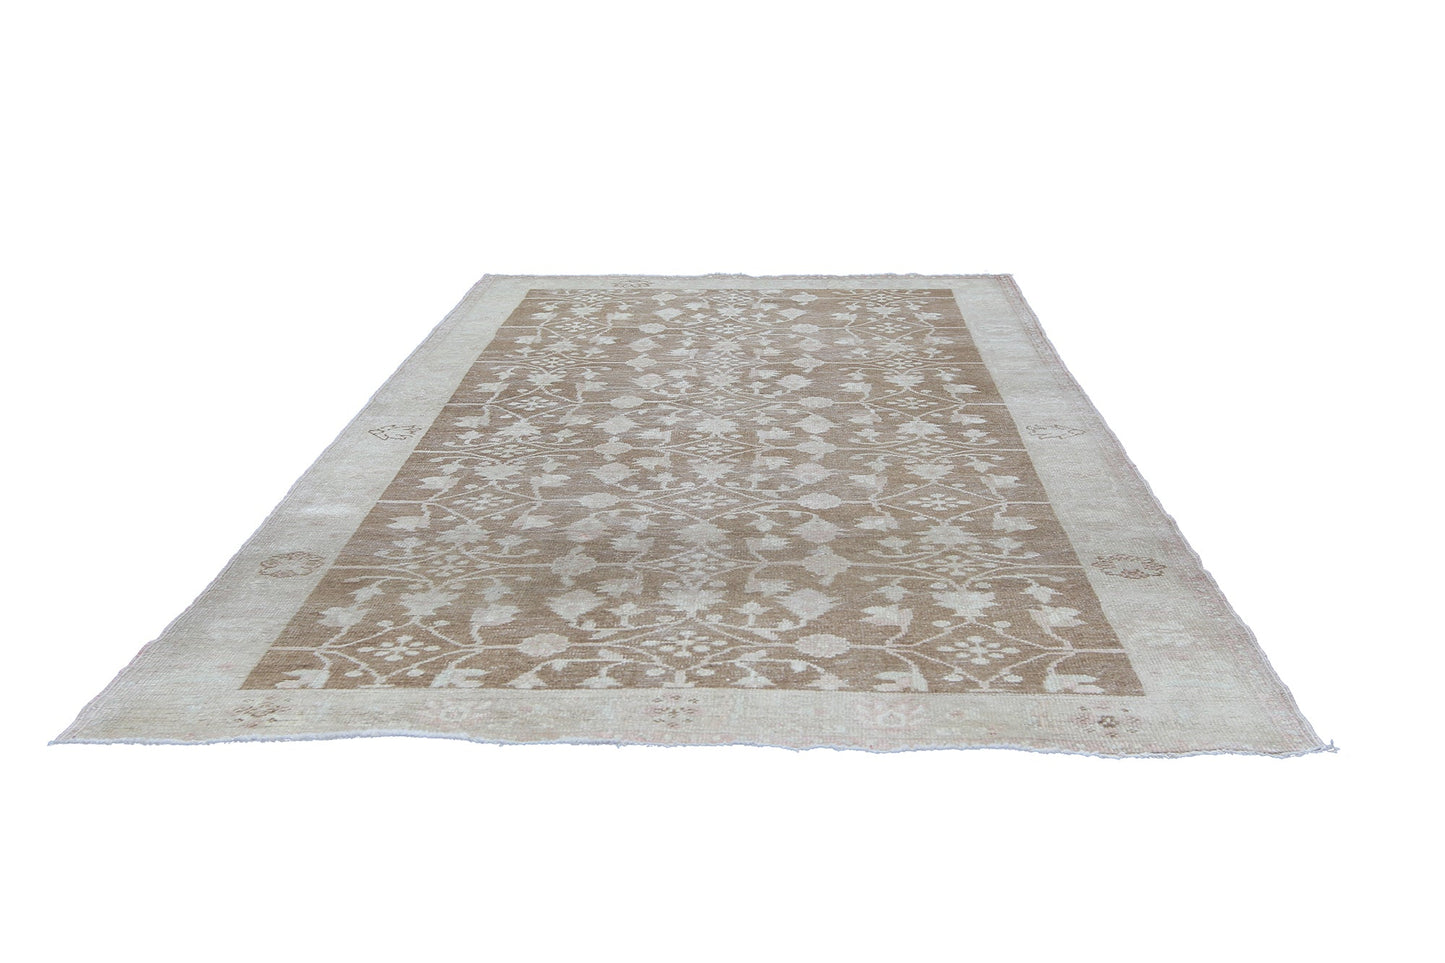 Turkish Handmade With a classic Design Wool Runner Rug product image #27556506992810